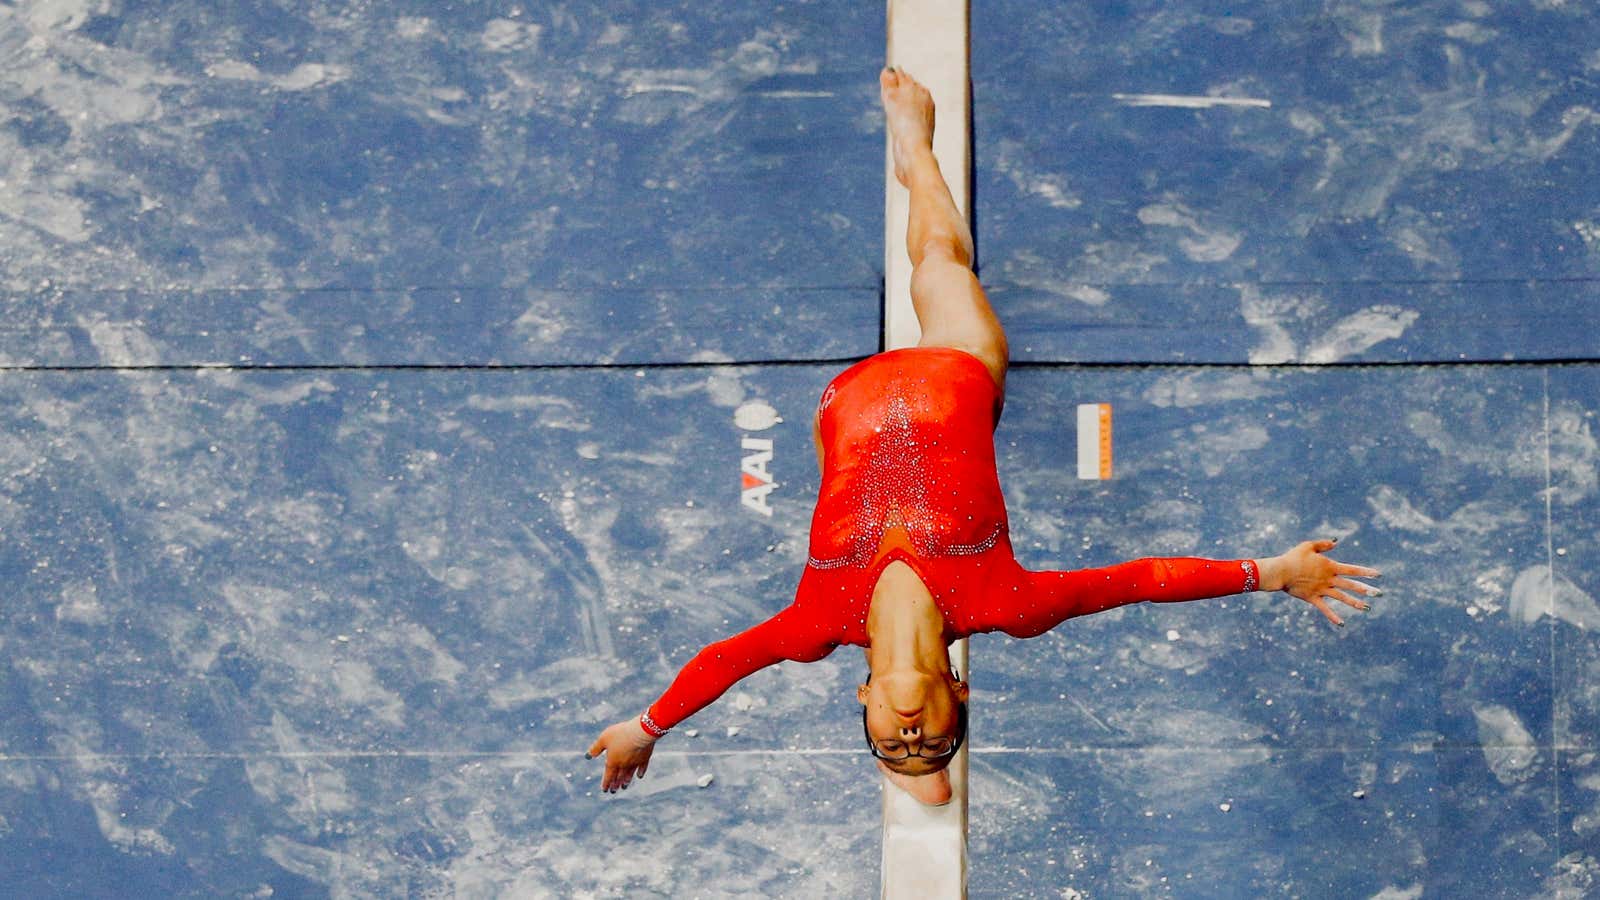 Balance is a good goal for gymnasts, not necessarily the rest of us.